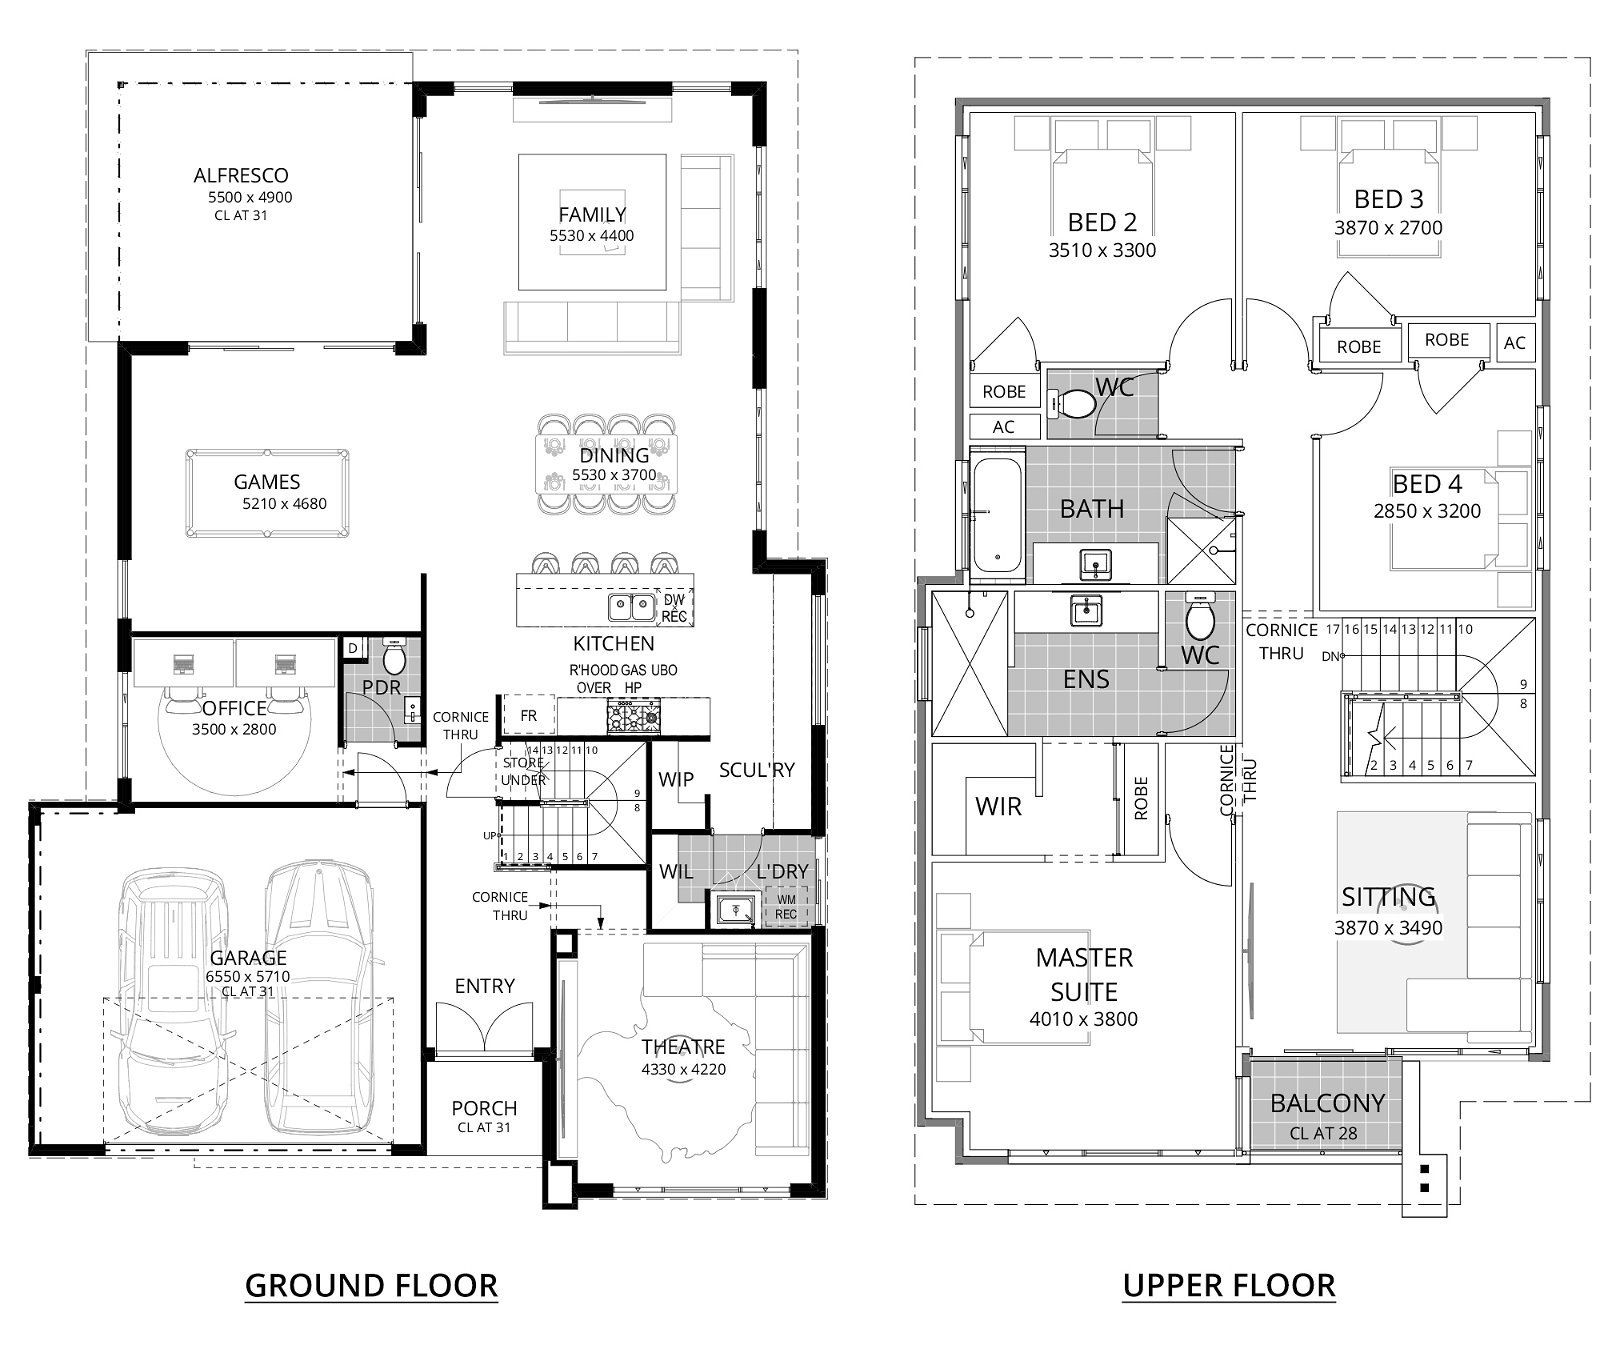 Residential Attitudes - Spaces For Aces - Floorplan - Spaces For Aces Floorplan Website